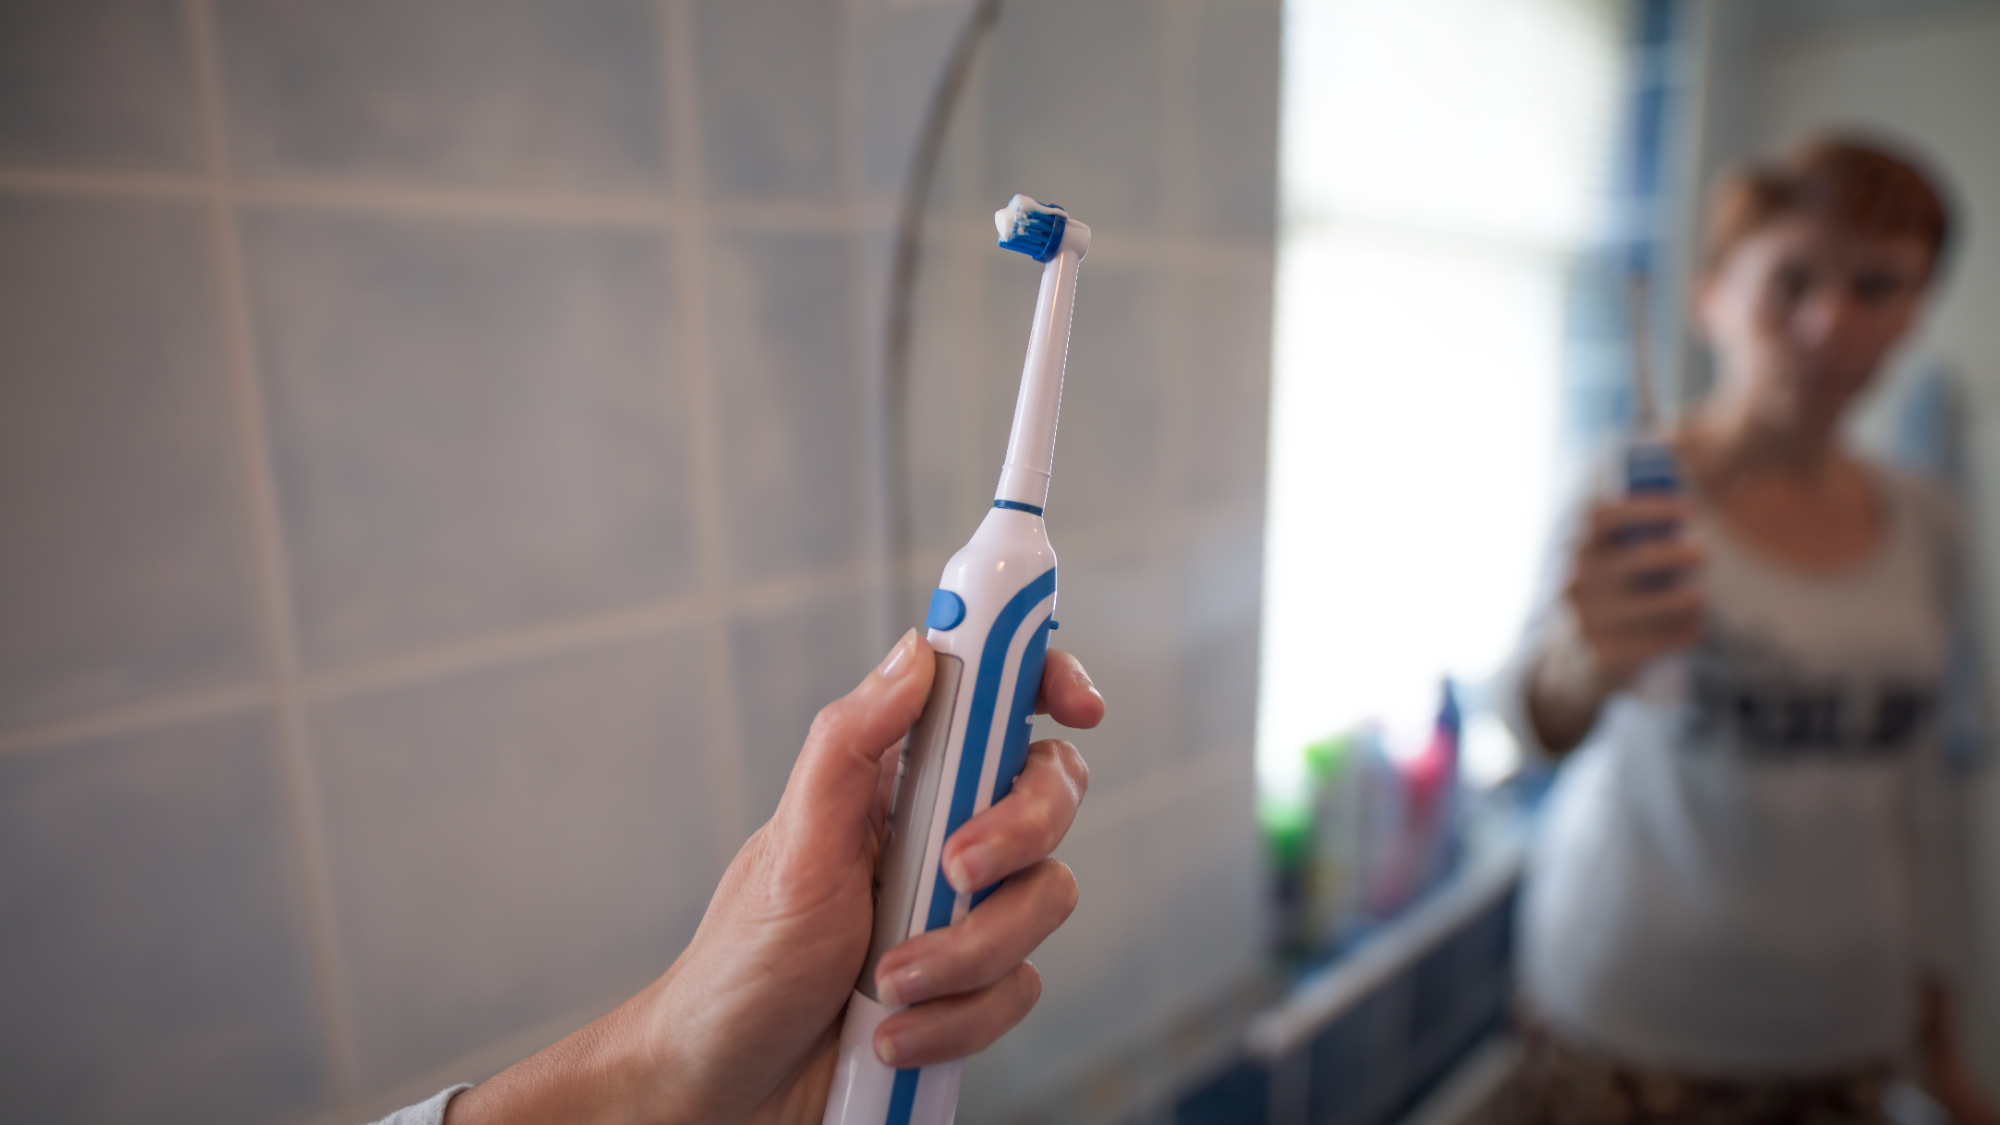 Cyber Monday electric toothbrush deals to help brighten your smile